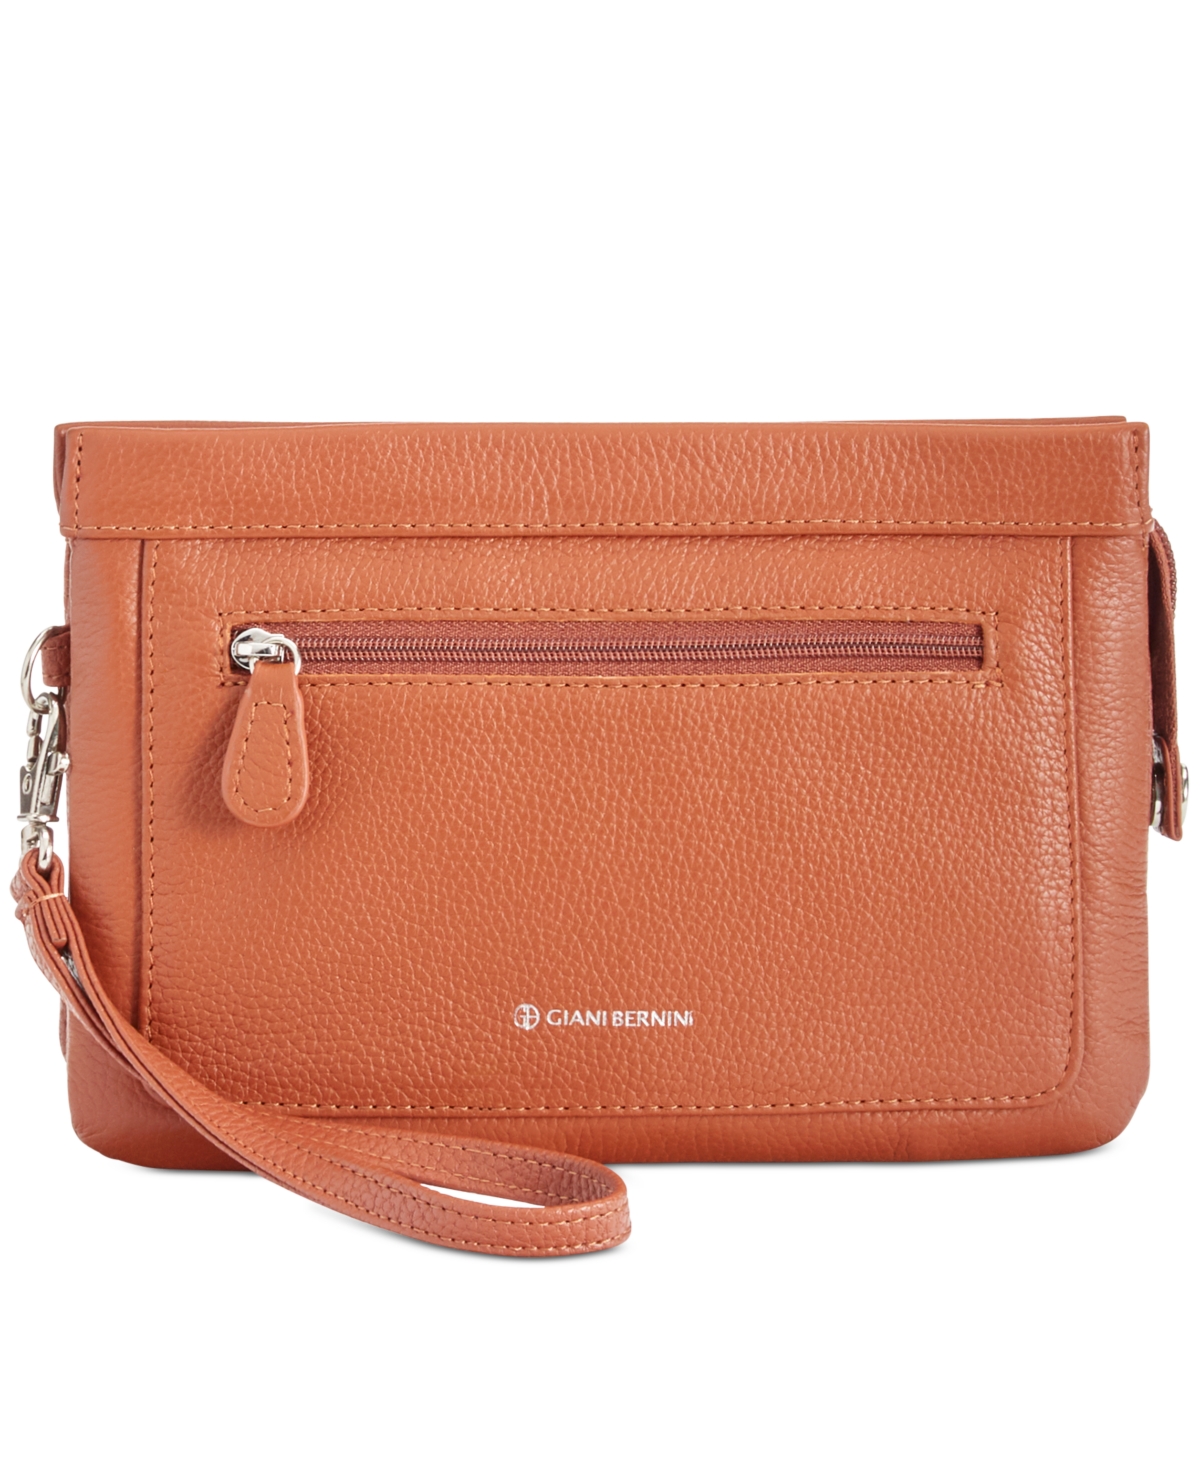 Softy Leather Crossbody Wallet, Created for Macy's - Wine/Gold